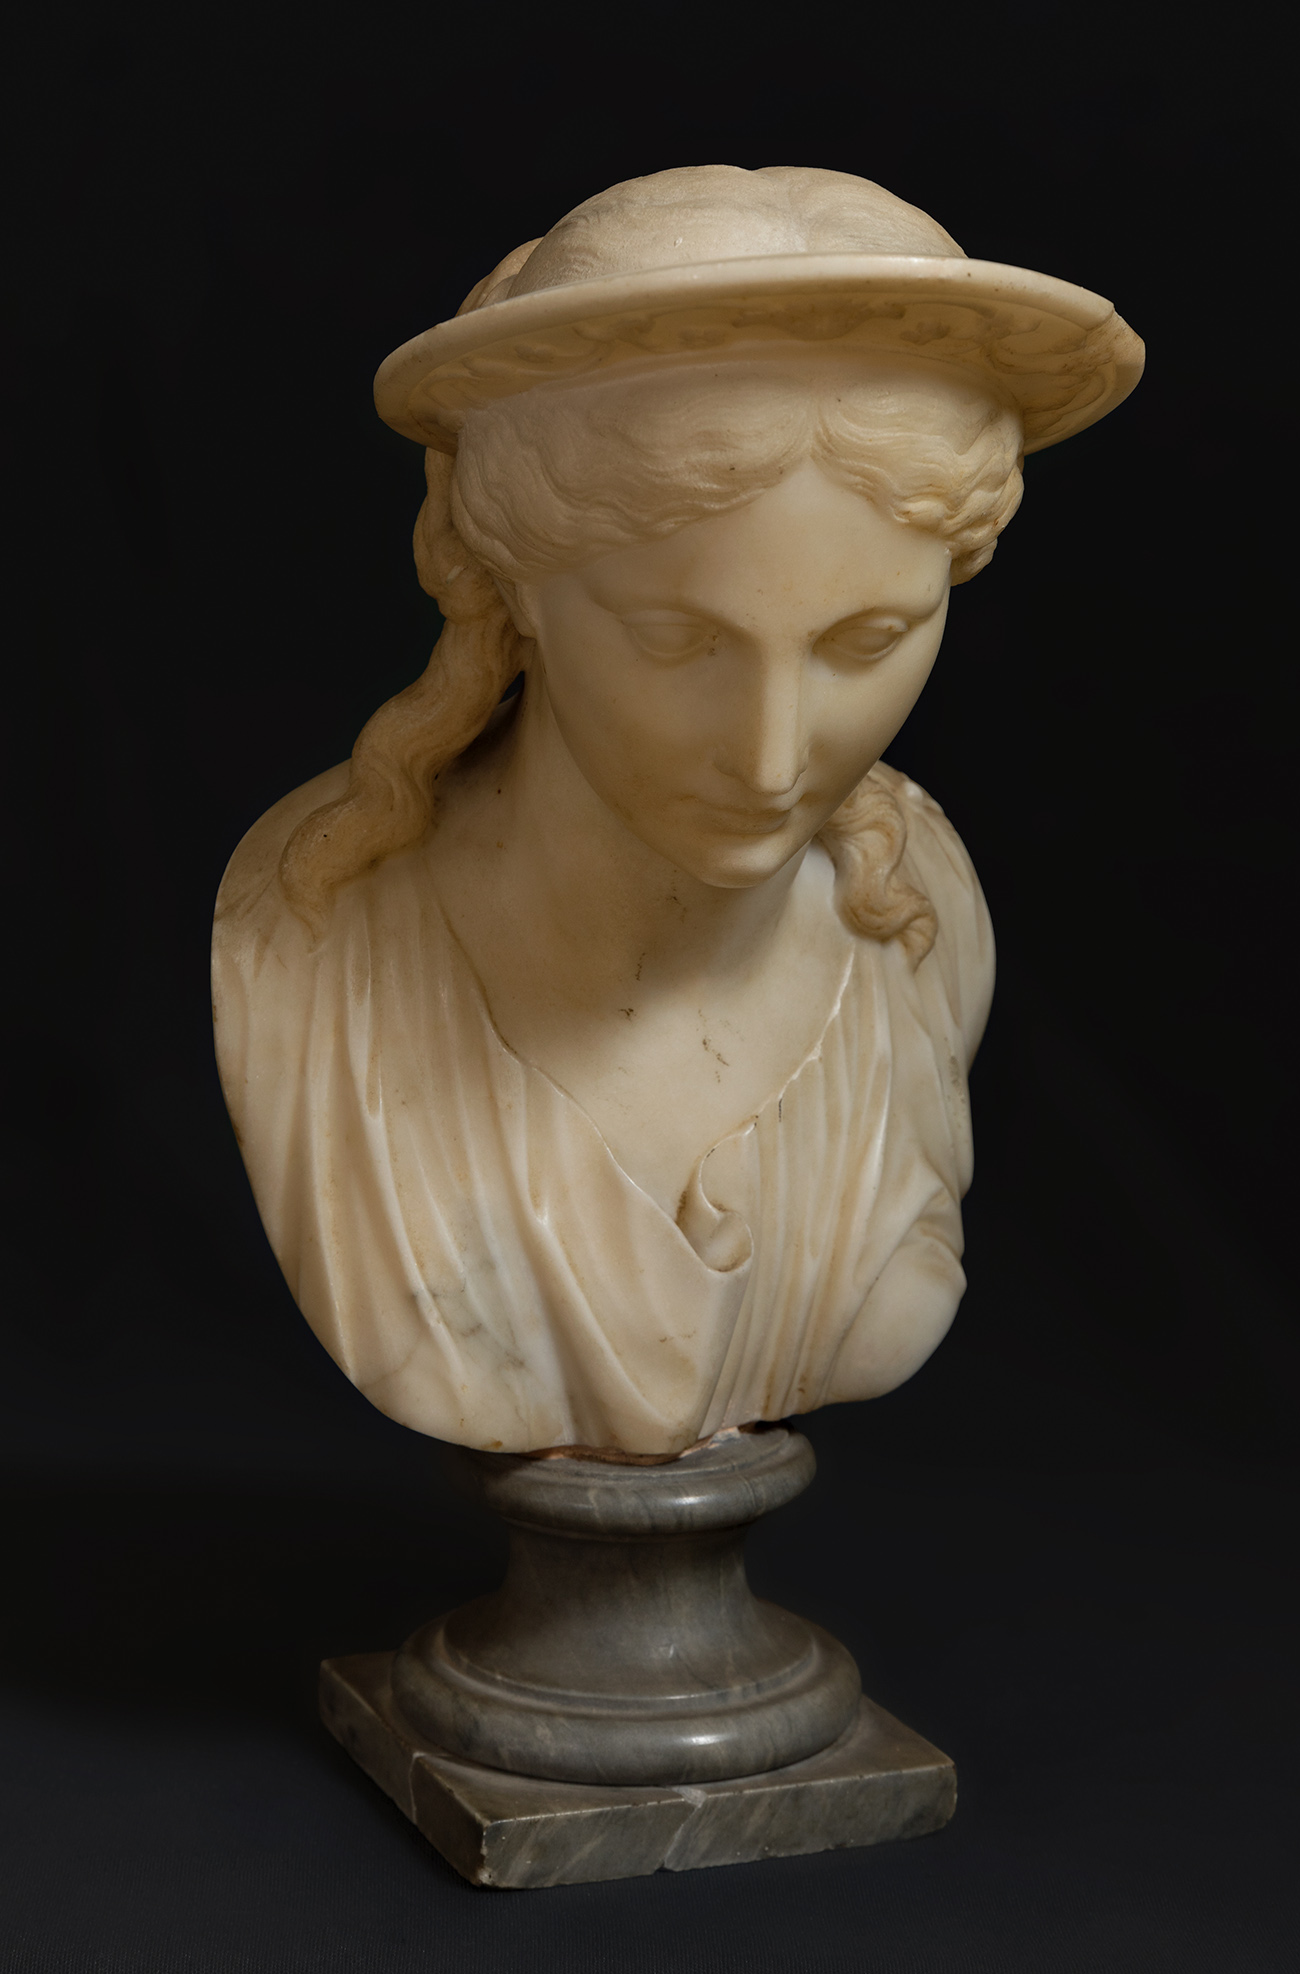 Italian school; late 18th century."Female bust.Carved carrara marble.It presents faults in the